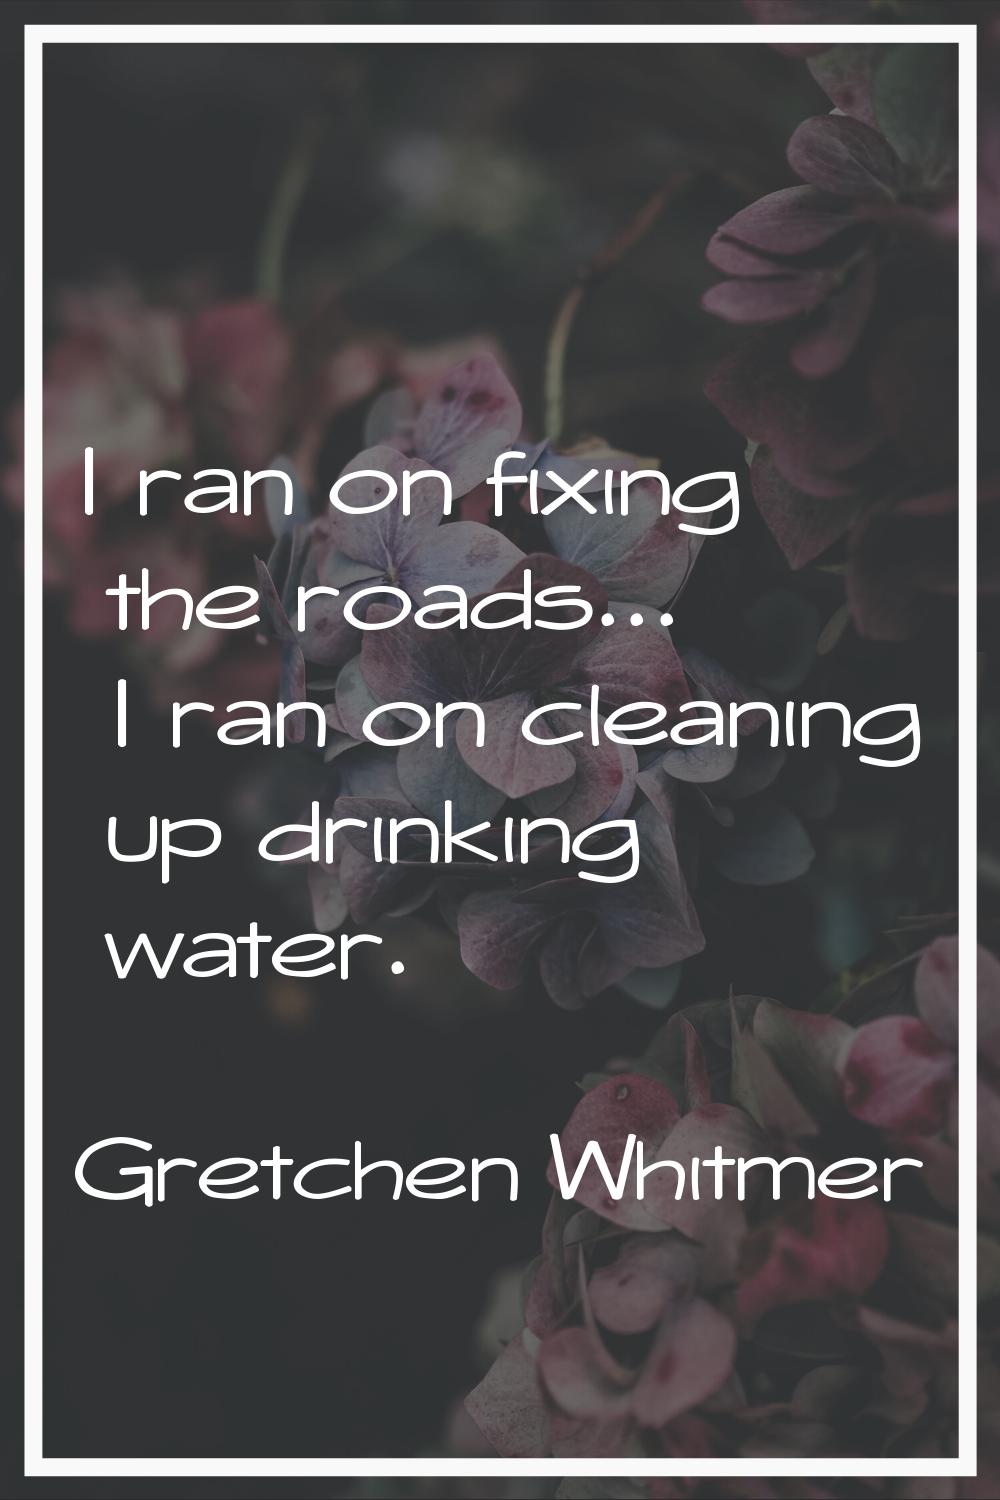 I ran on fixing the roads... I ran on cleaning up drinking water.